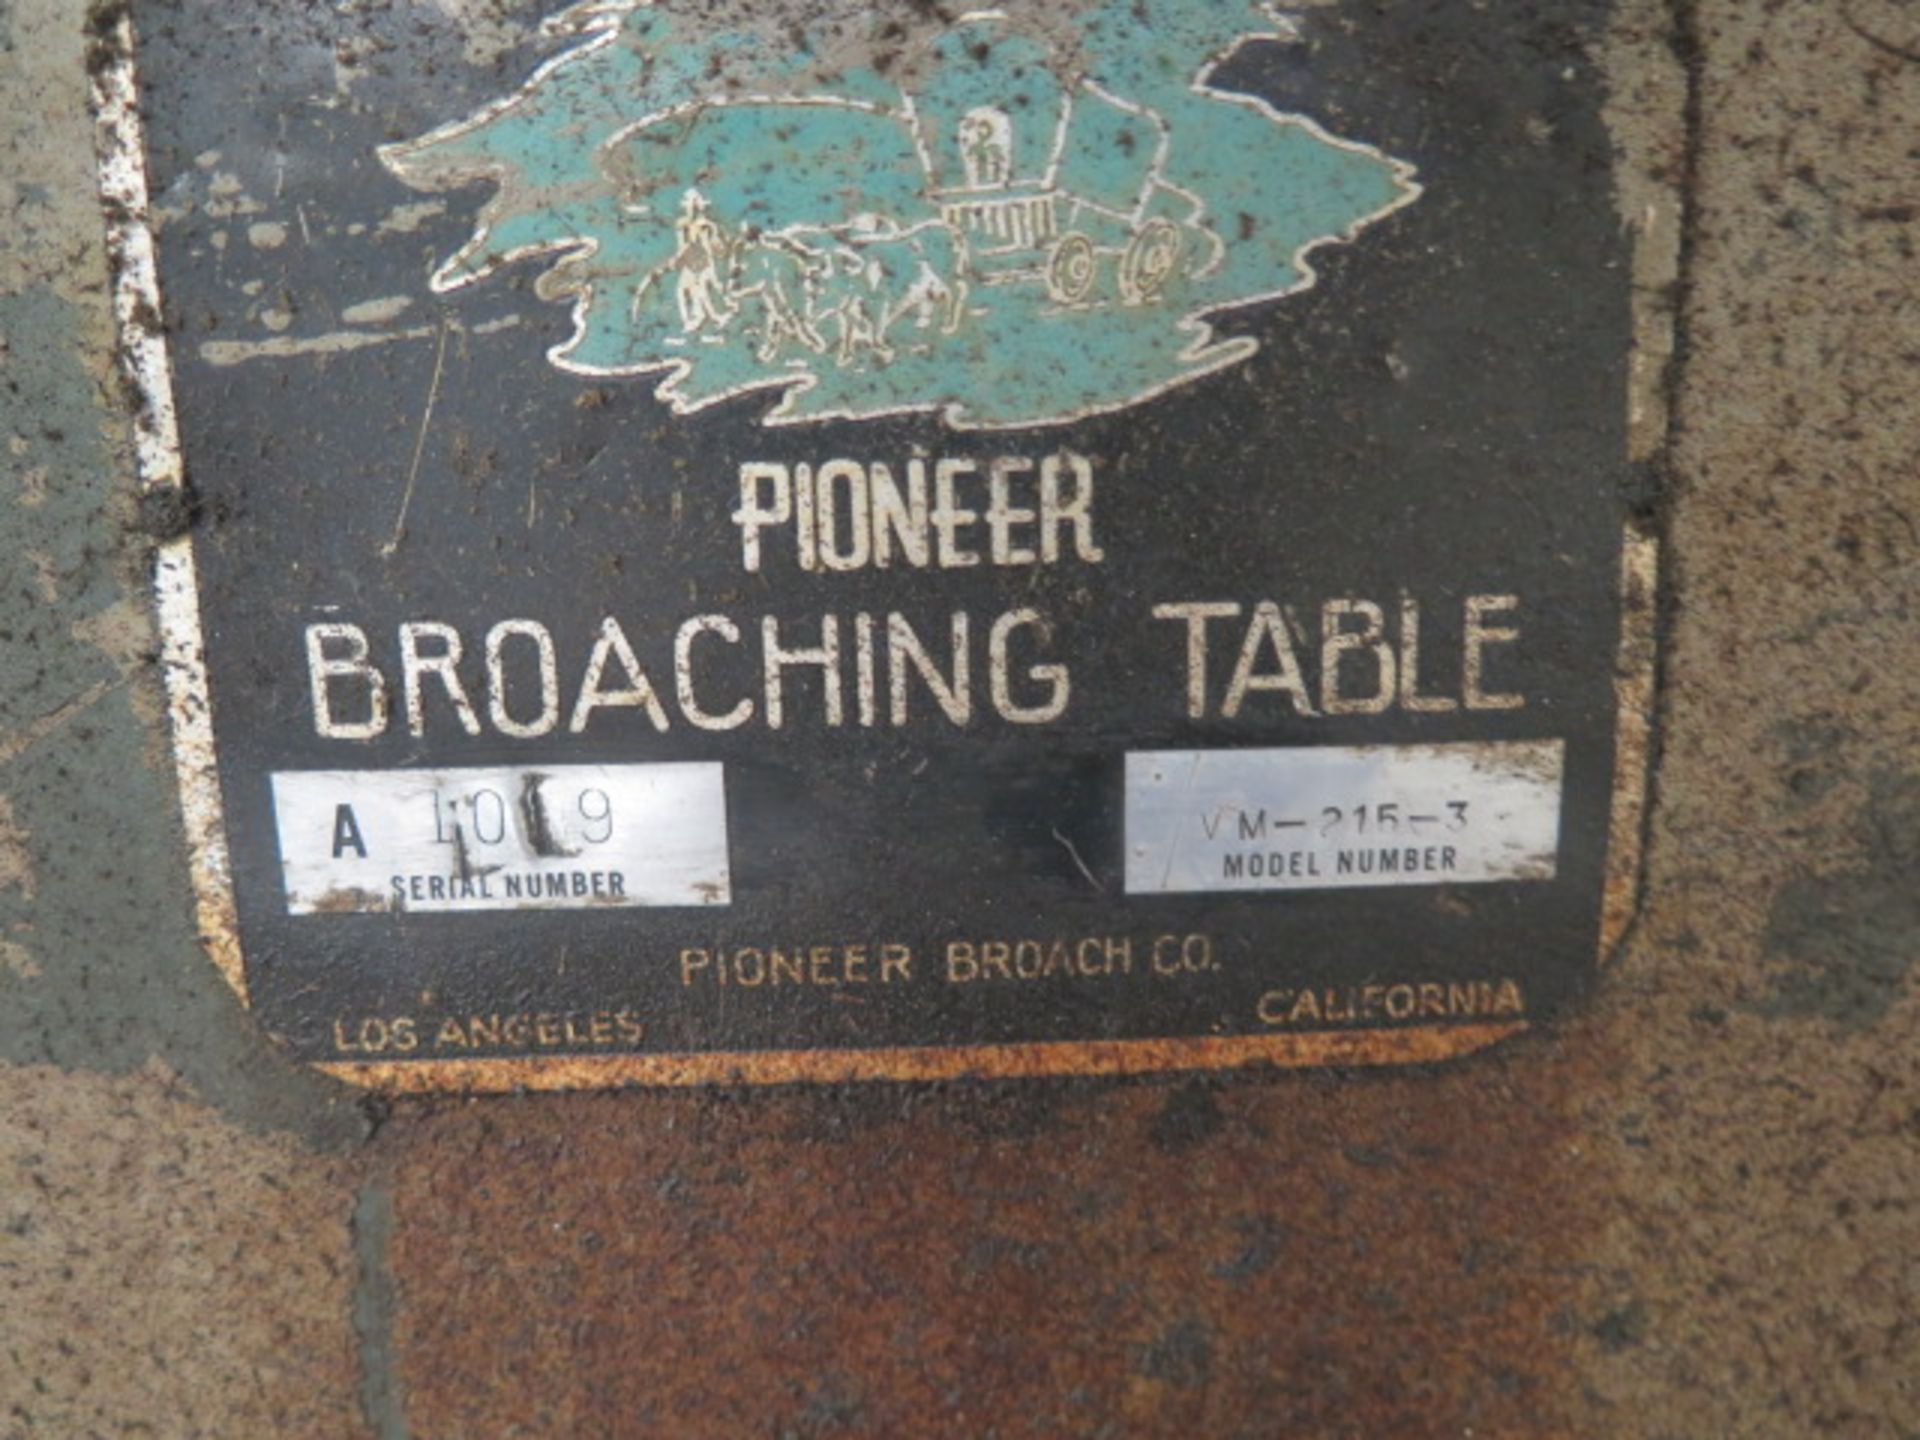 Pioneer Broach mdl. VM-215-3 Vertical Broaching Machine s/n A1019 w/ 11 ½” x 11 ½” Table, Coolant - Image 7 of 7